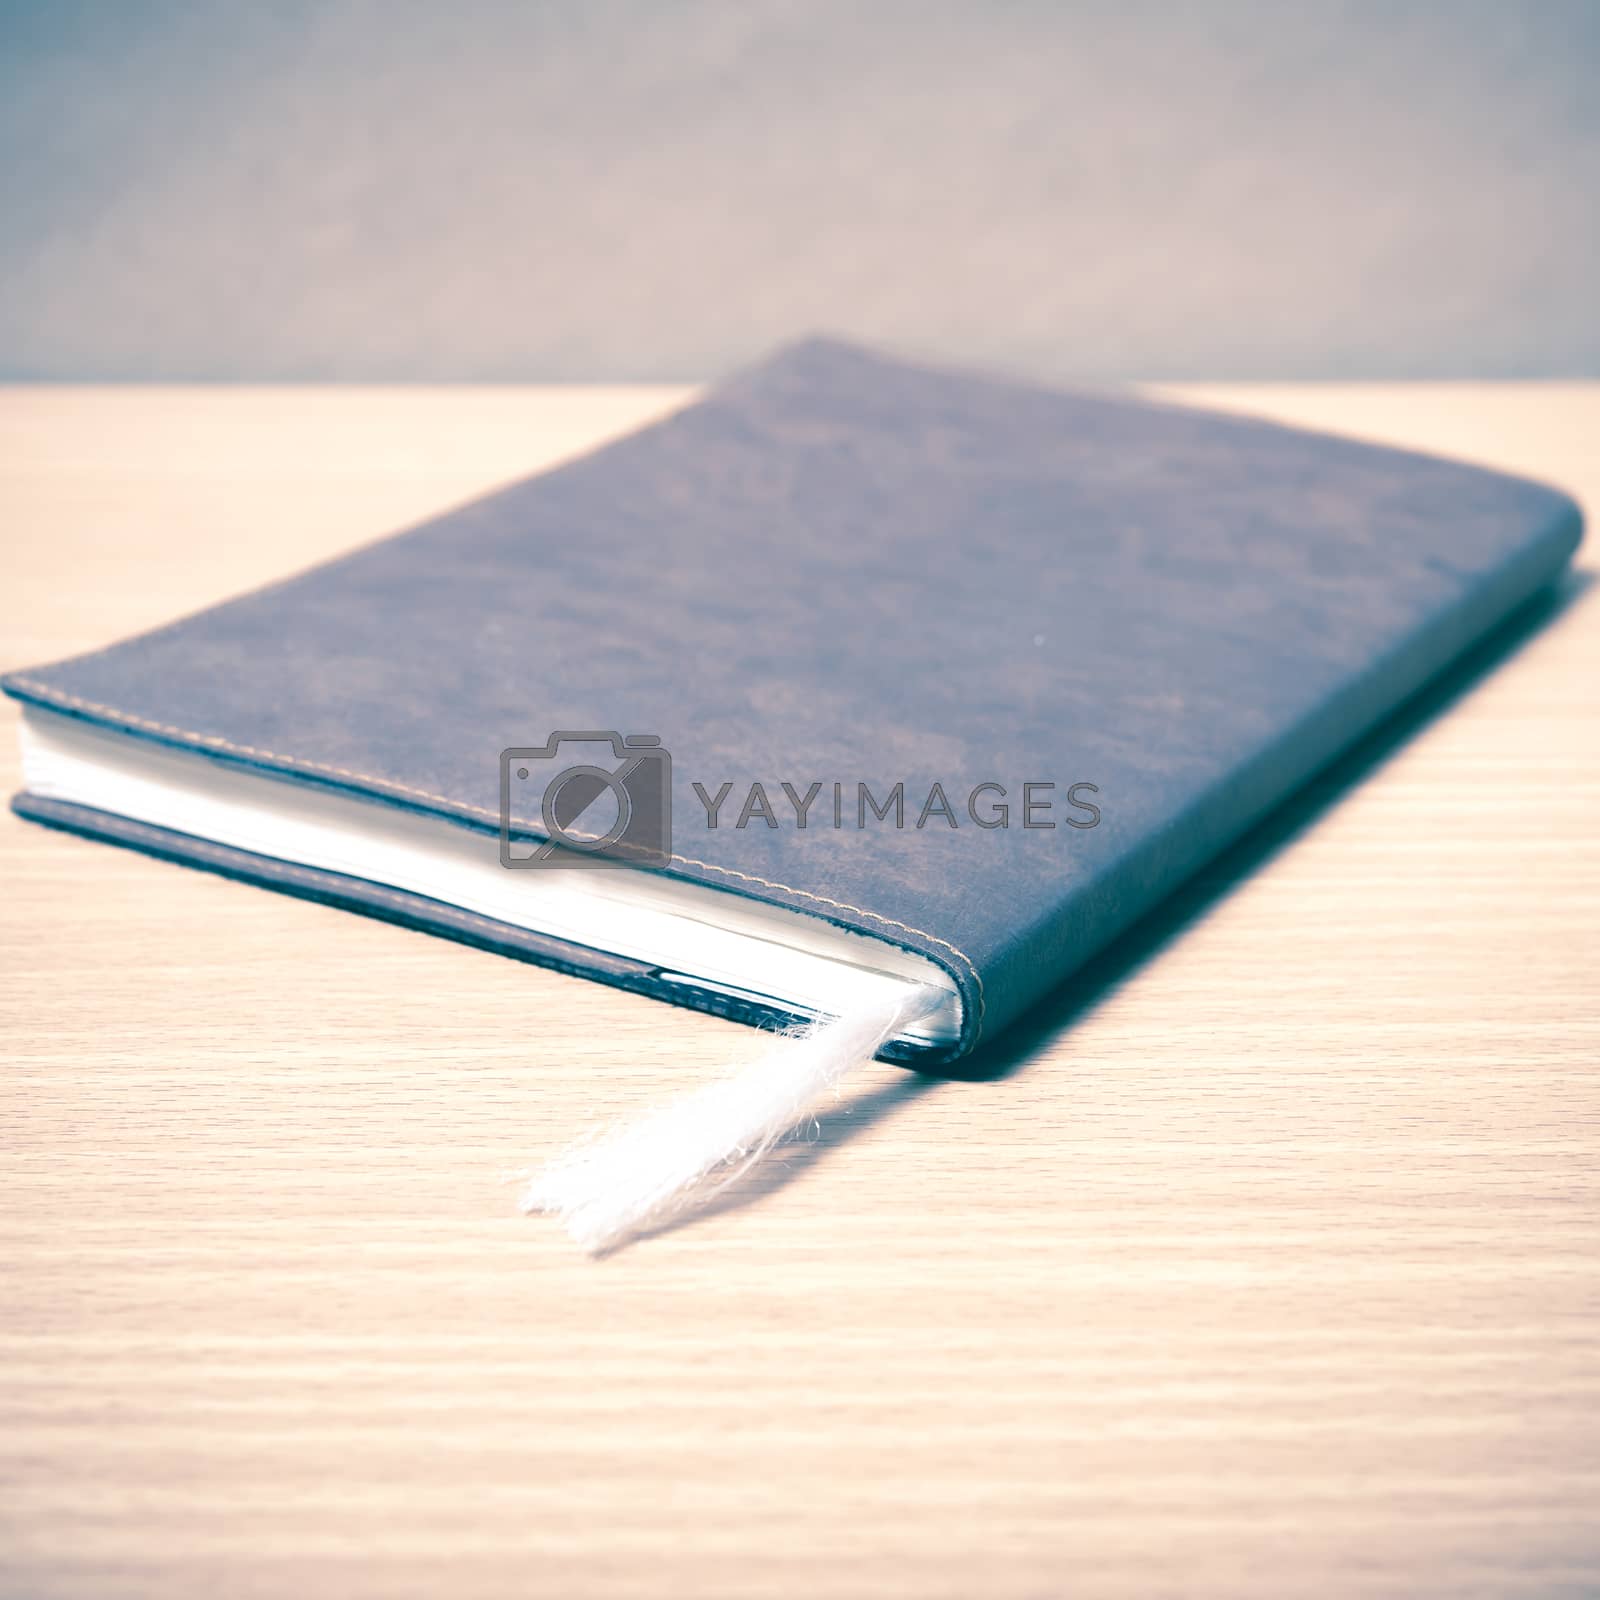 Royalty free image of brown book  by ammza12